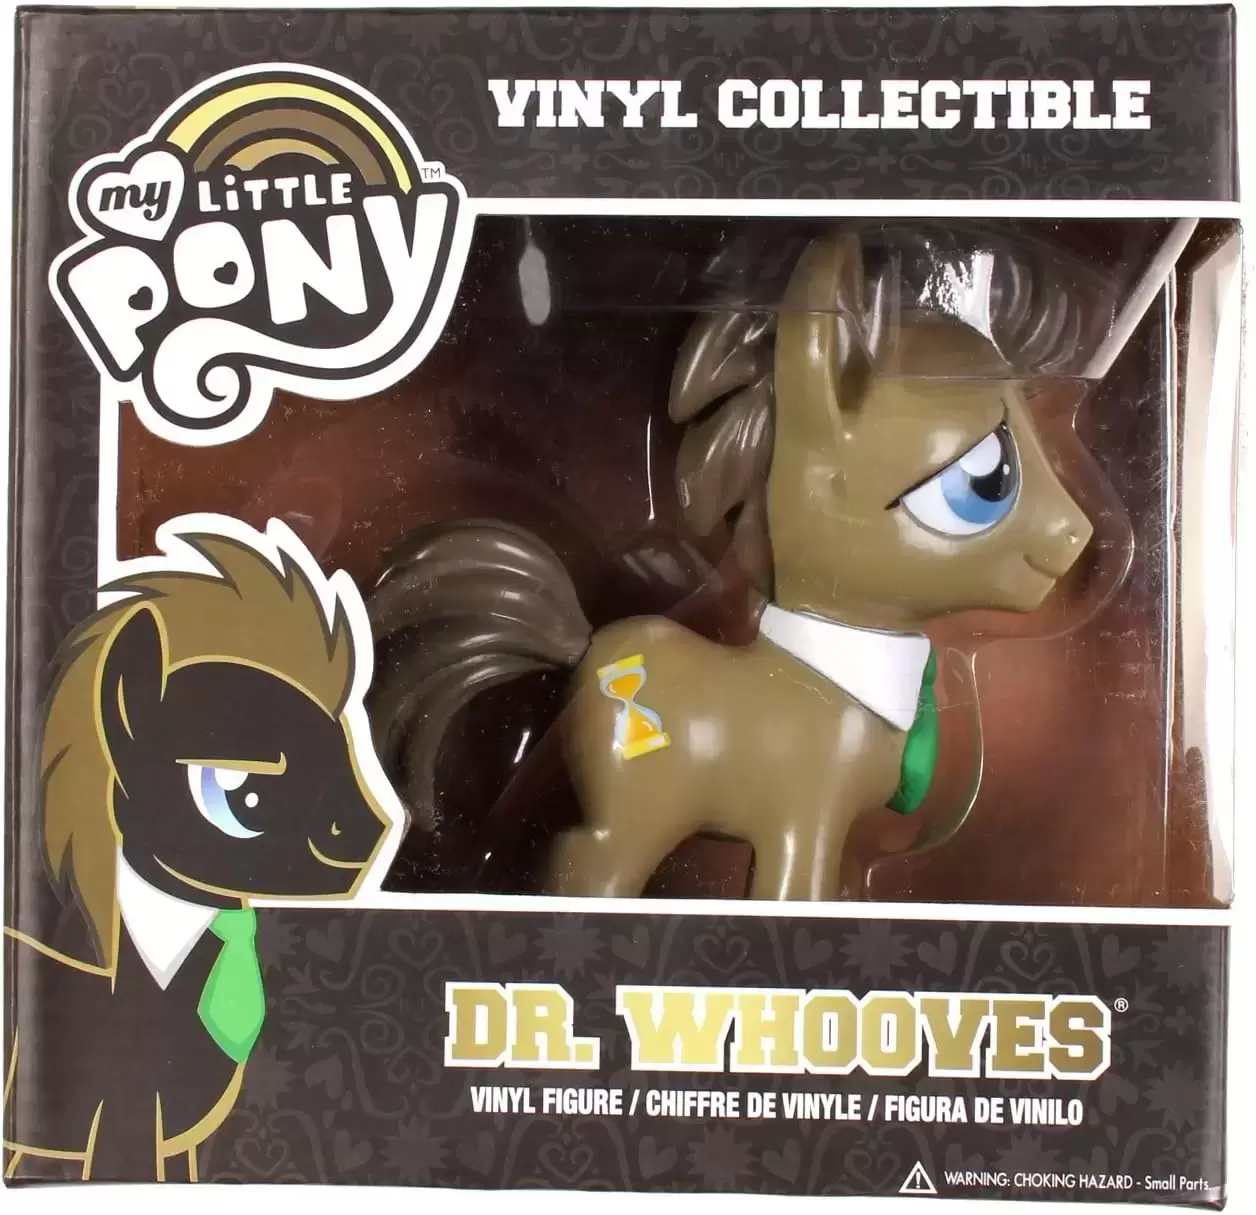 Vinyl Collectible - My Little Pony - Dr. Whooves (Green Tie)